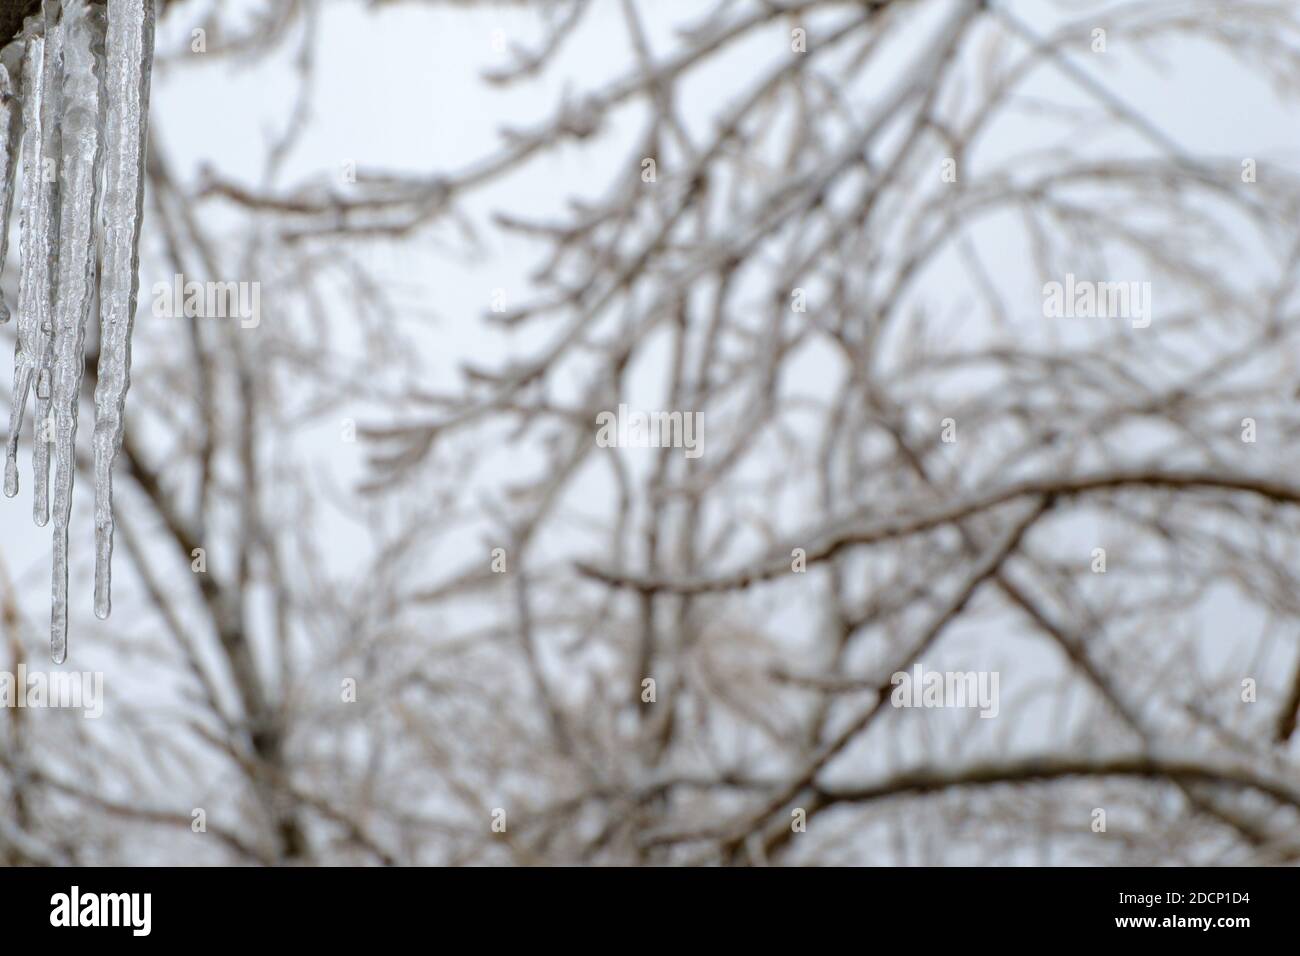 Freezing rain. Blurred Icy tree branches after an icy rain. Natural disaster. Selective focus on the icicles. Stock Photo